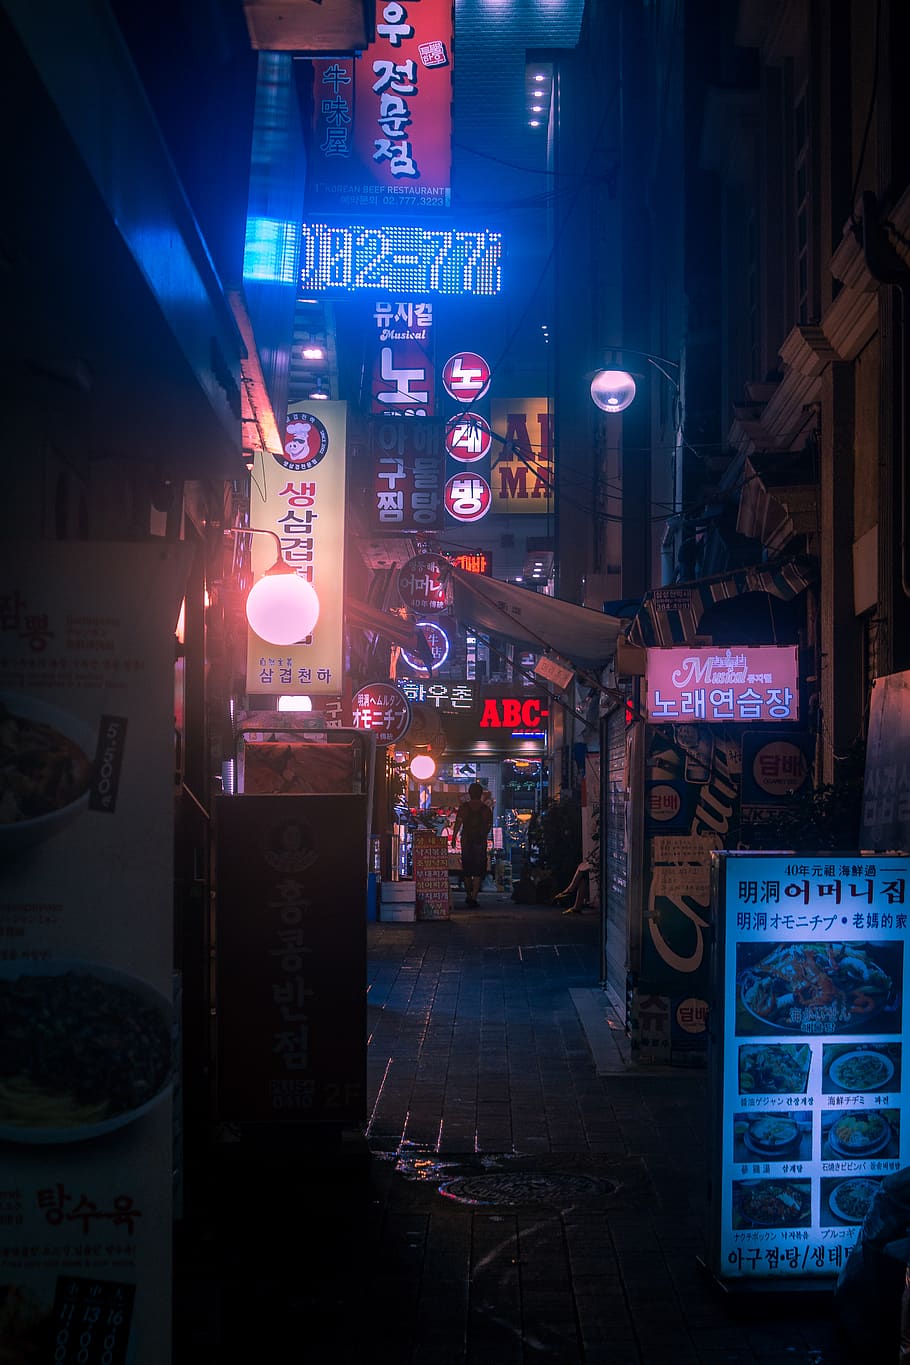 A street at night with neon signs and advertisements. - Seoul